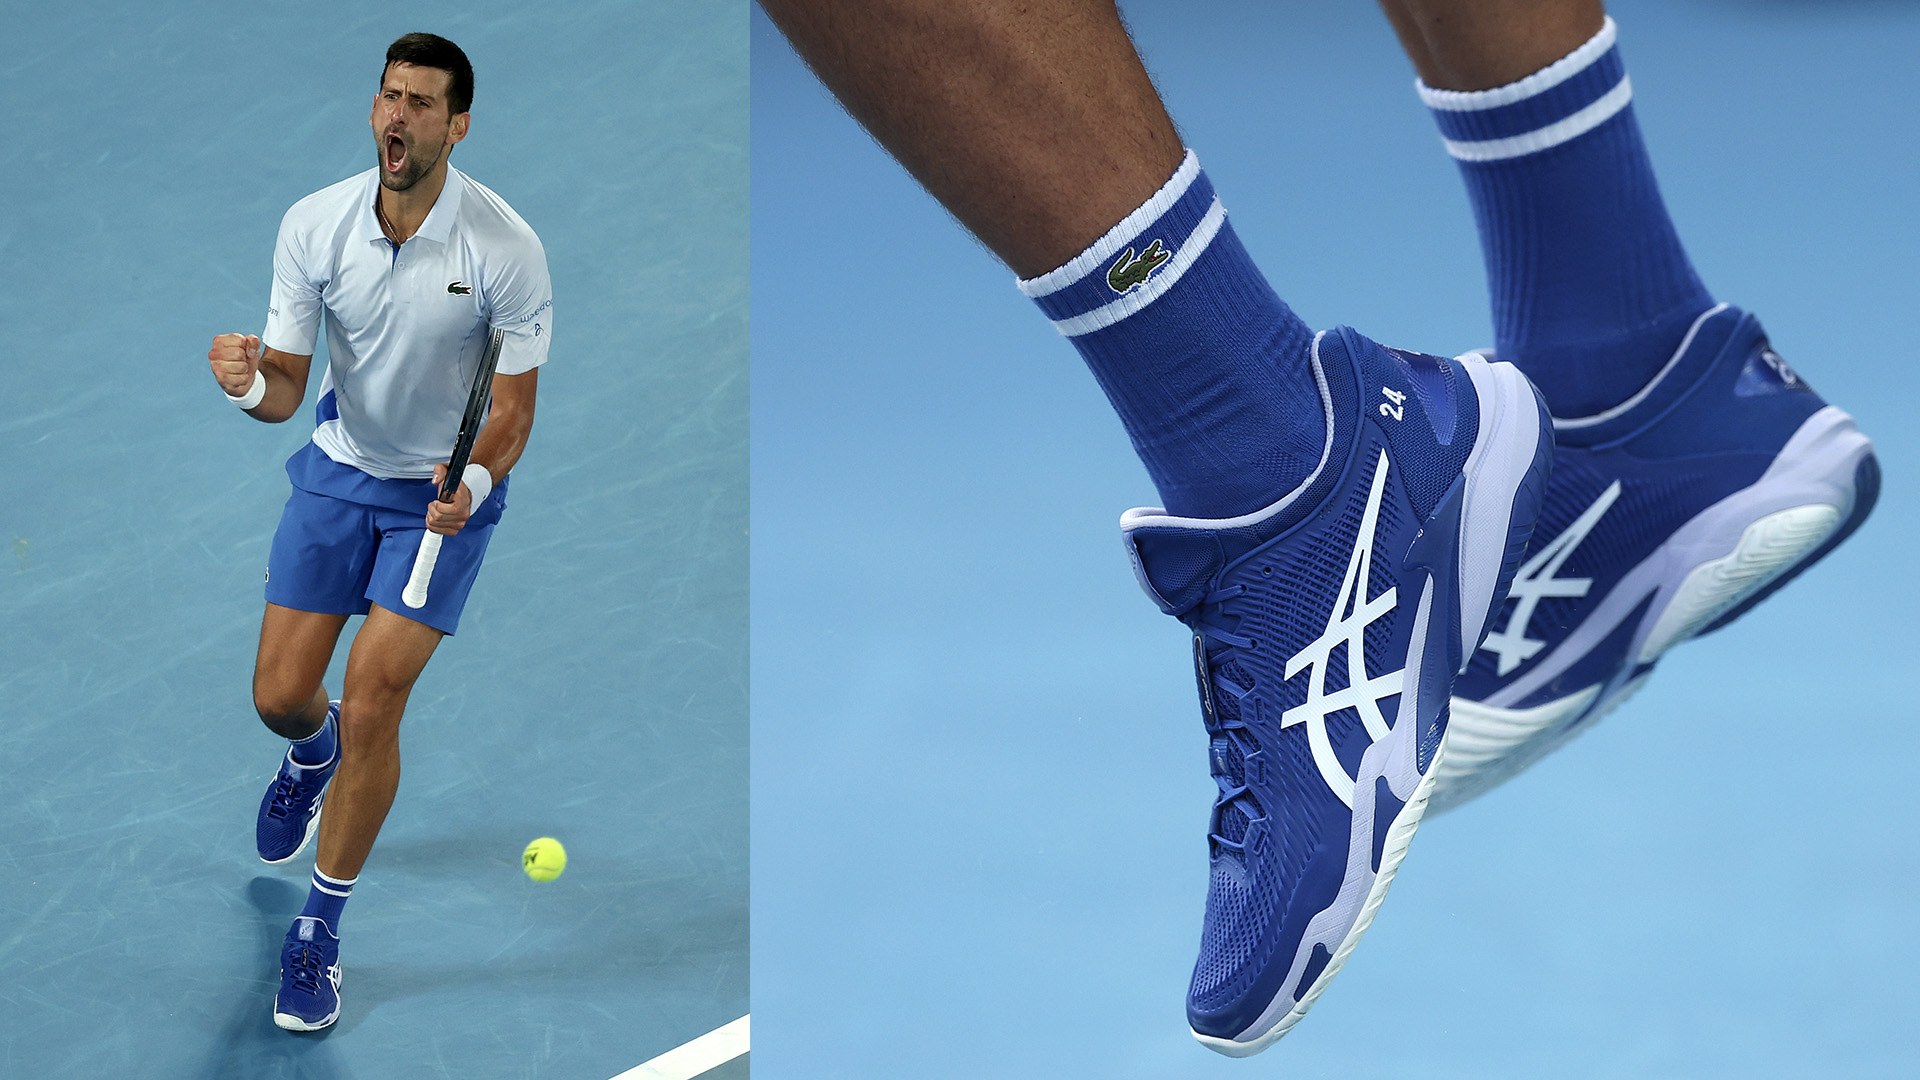 Novak Djokovic steps out in 24 shoes as he makes winning